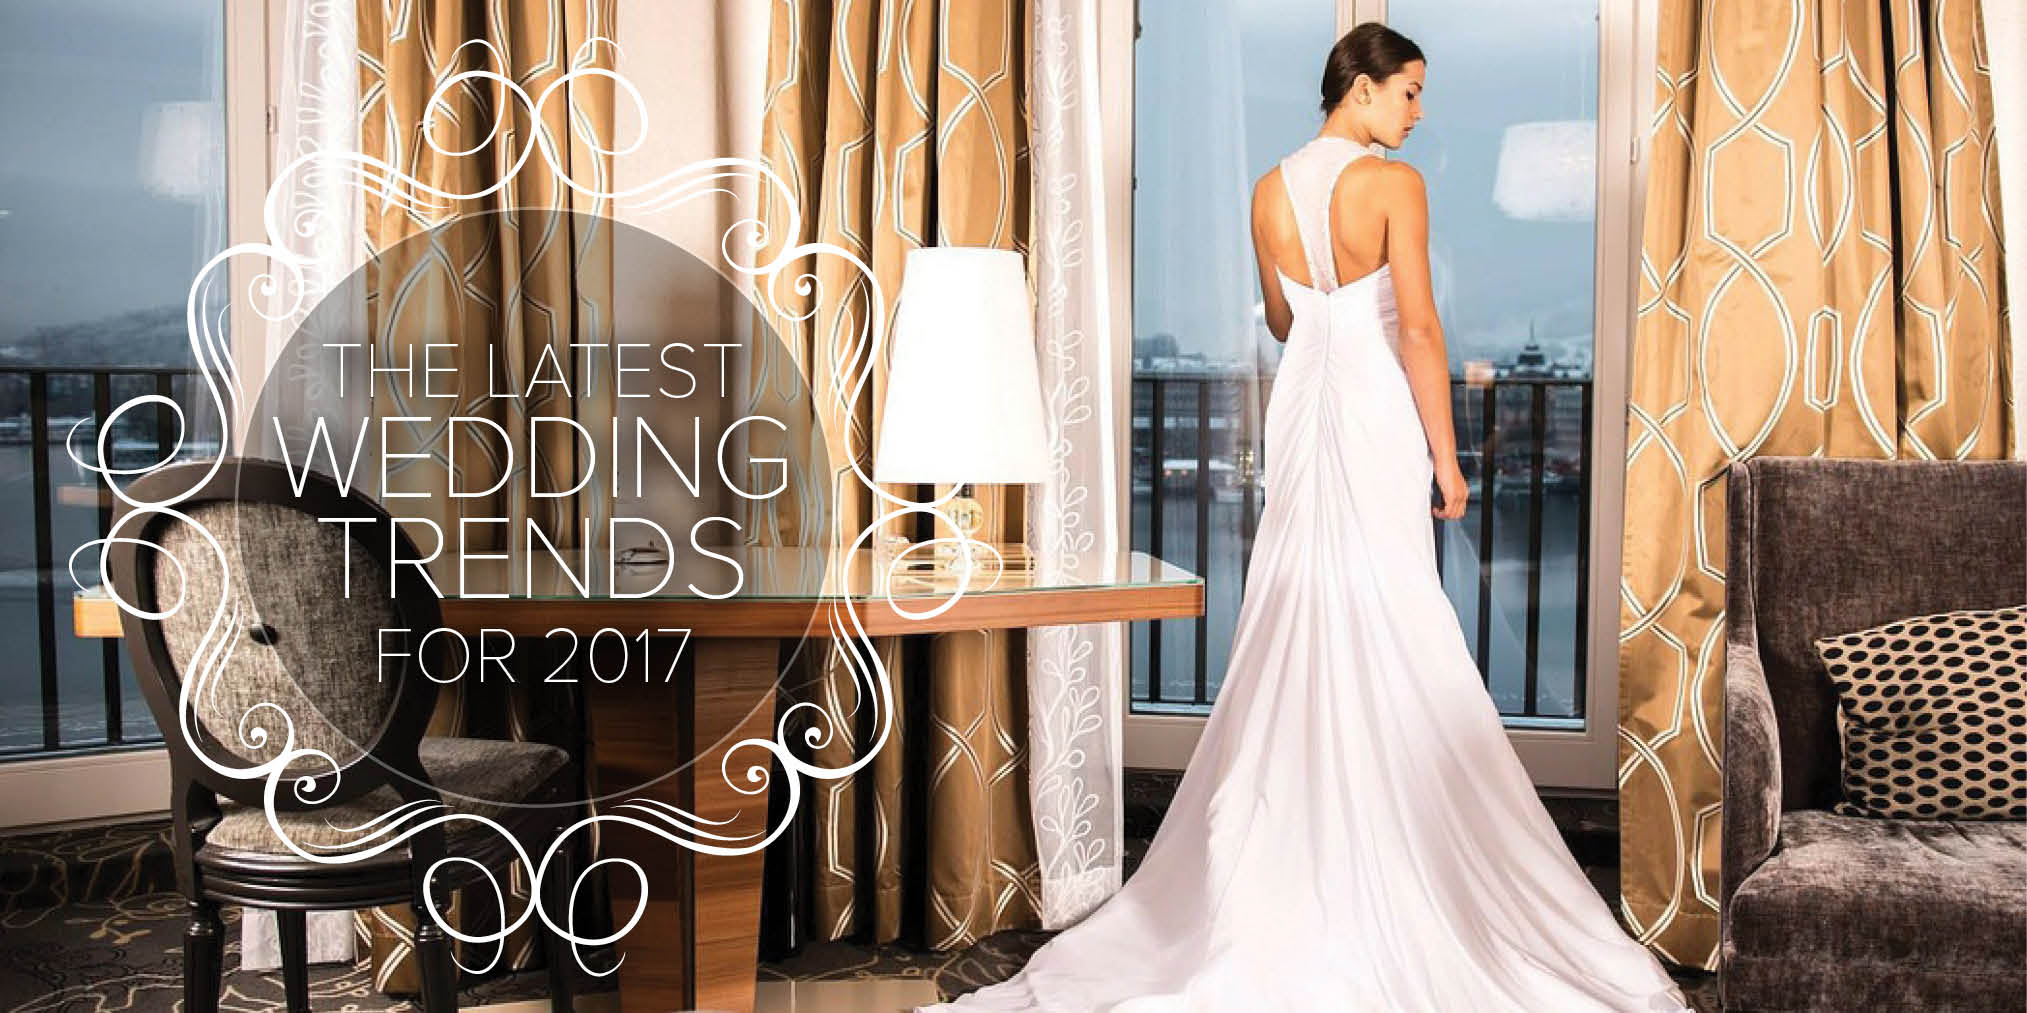 The latest wedding trends for 2017